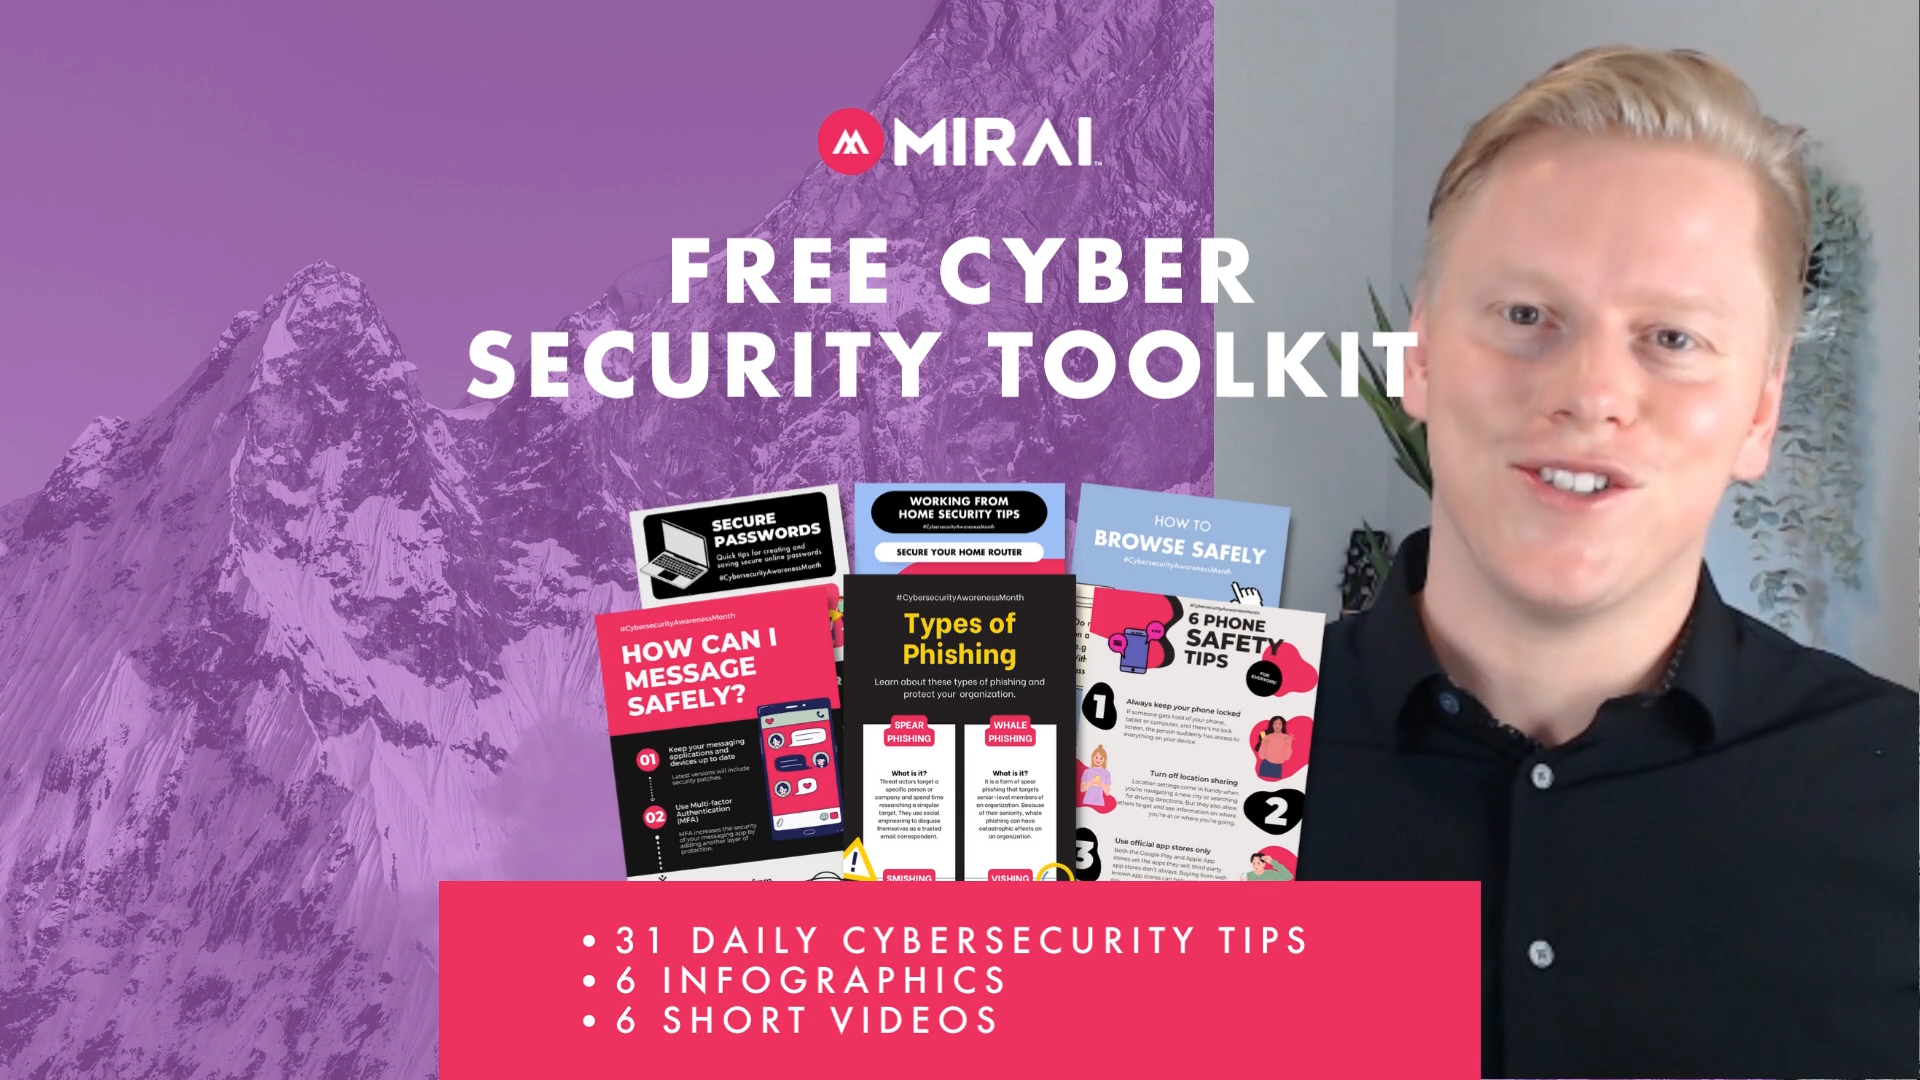 Mirai Security has announced the launch of its Free Cyber Security Awareness Toolkit for Cybersecurity Awareness Month (CSAM), which is held in October. 
The kit is being offered with no email signup required. It includes a plethora of tips, articles, videos, and infographics designed to help build a cybersecurity culture in manageable, easy-to-understand ways.
Watch Calder Brown, Cybersecurity Specialist at Mirai Security, provide a brief introduction to Cyber Security Awareness Month and how to use Mirai's tool kit in your organization and community. 
Download your toolkit now:
https://info.miraisecurity.com/cybersecurity-awareness-month-toolkit